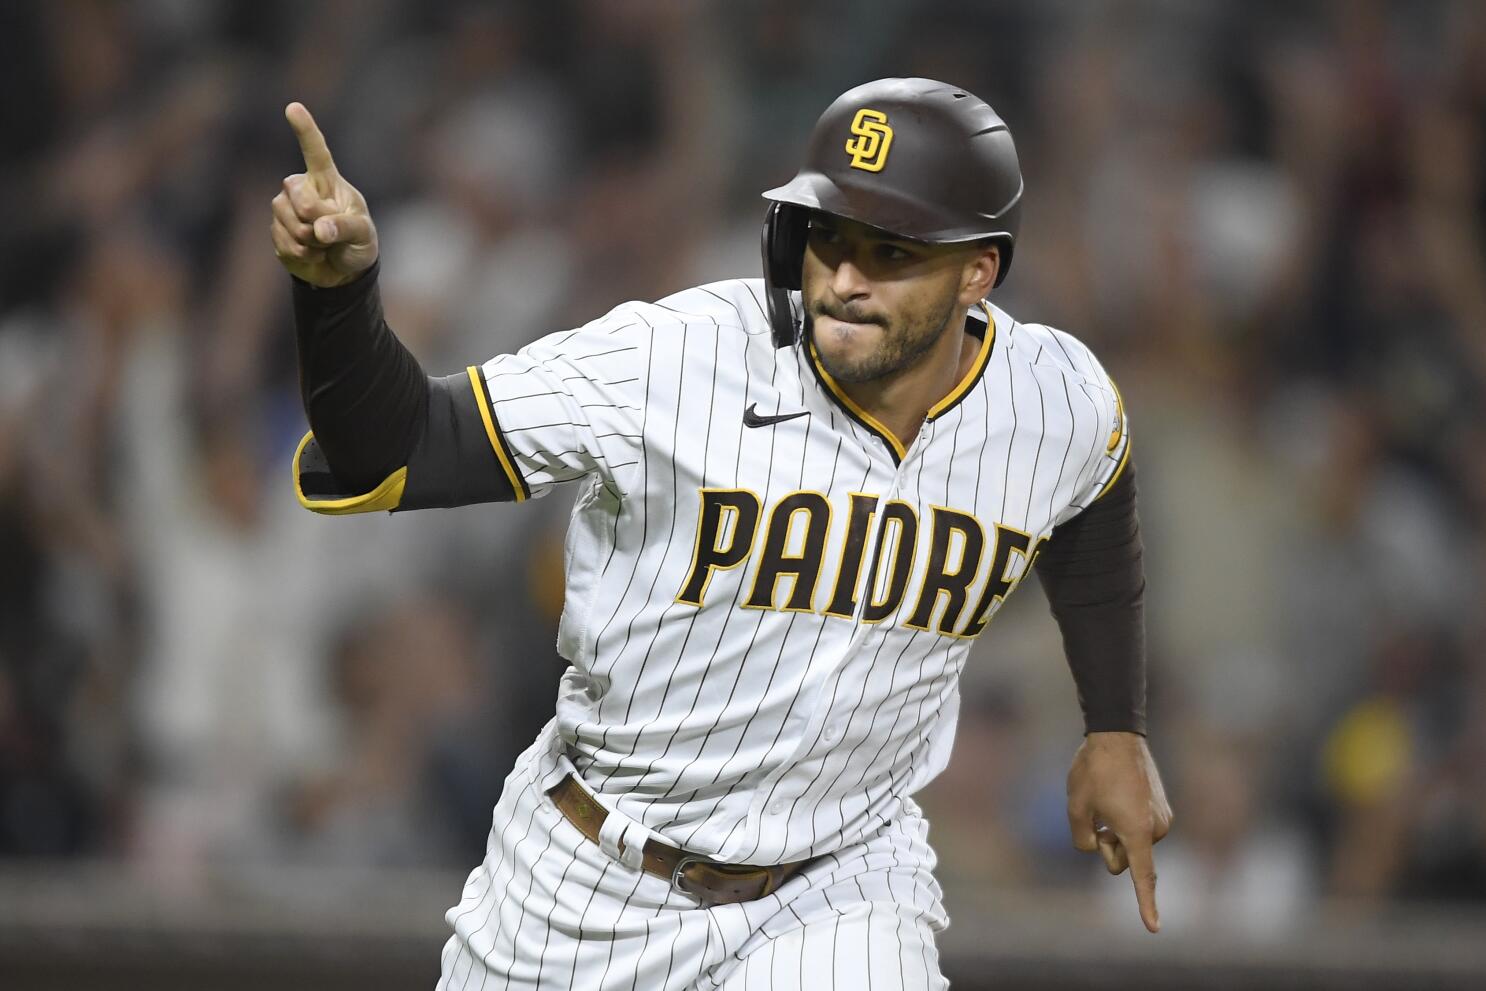 Padres roster review: Javy Guerra - The San Diego Union-Tribune